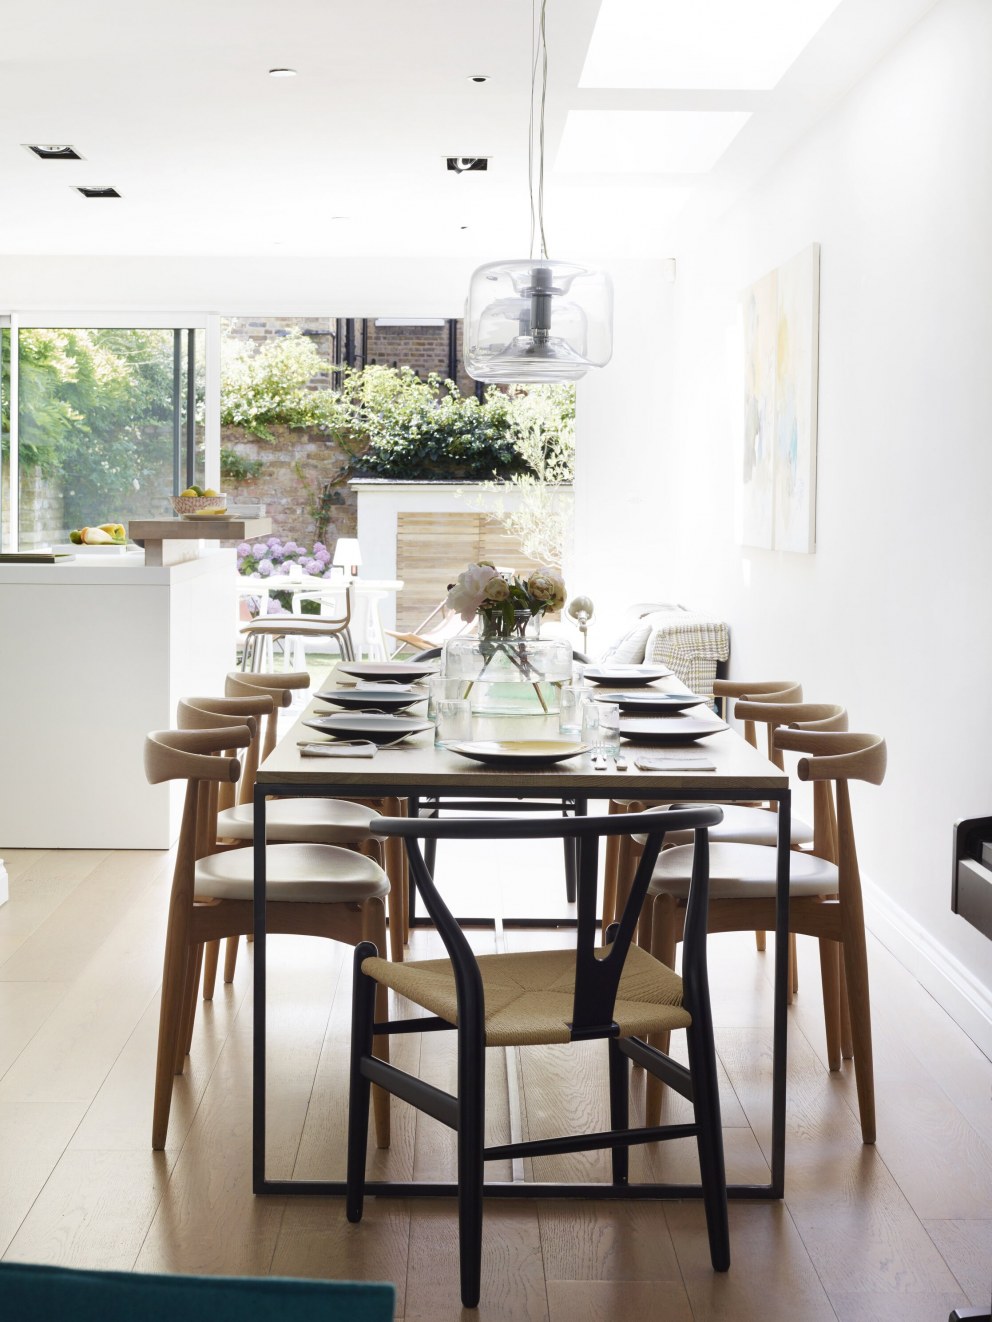 Fulham Family Home | dining room and garden | Interior Designers